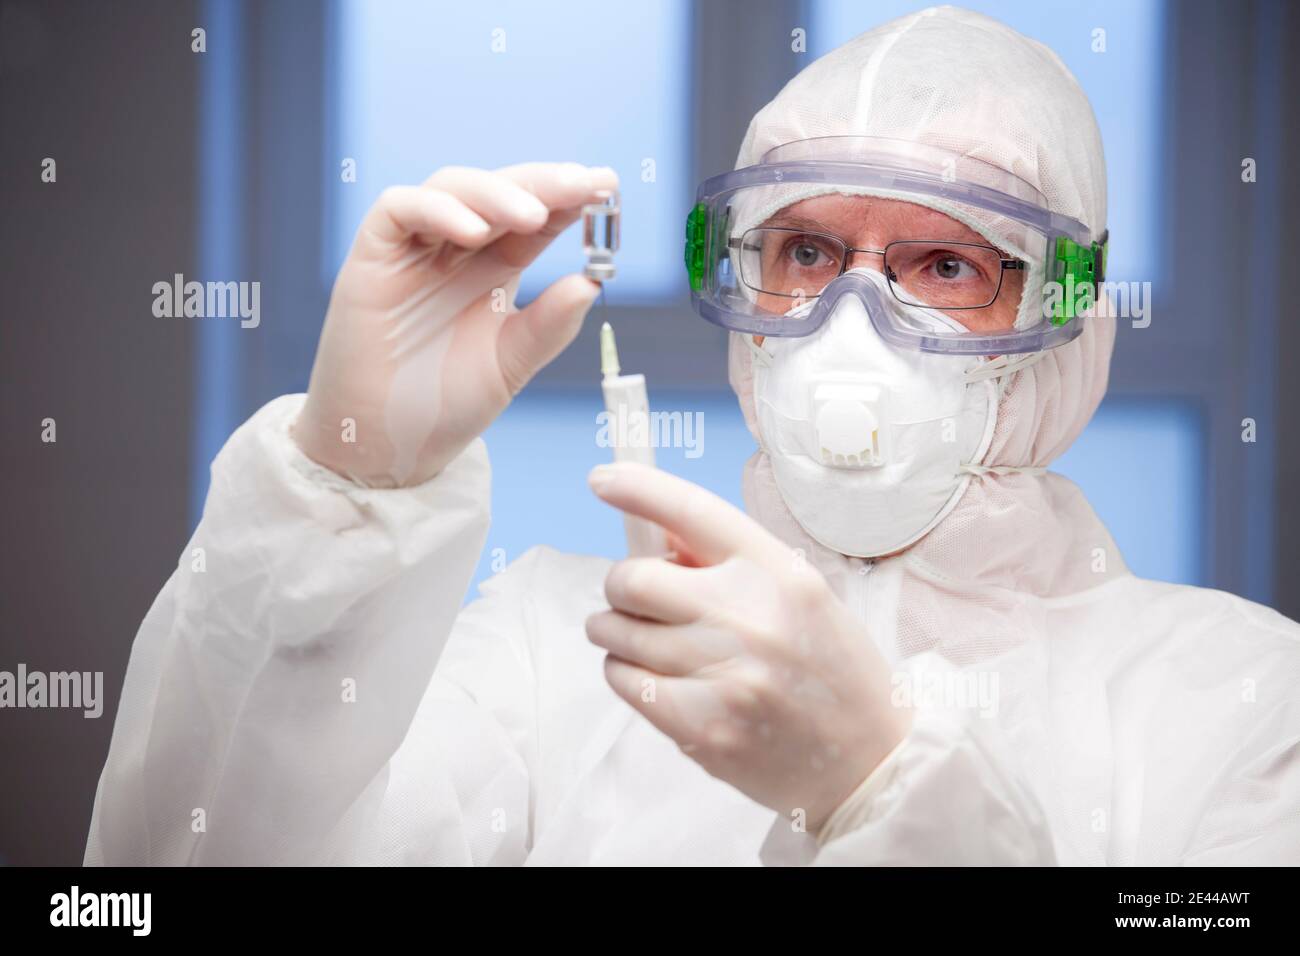 Doctor in white protective clothind preparing a syringe for vaccination - focus on the face Stock Photo